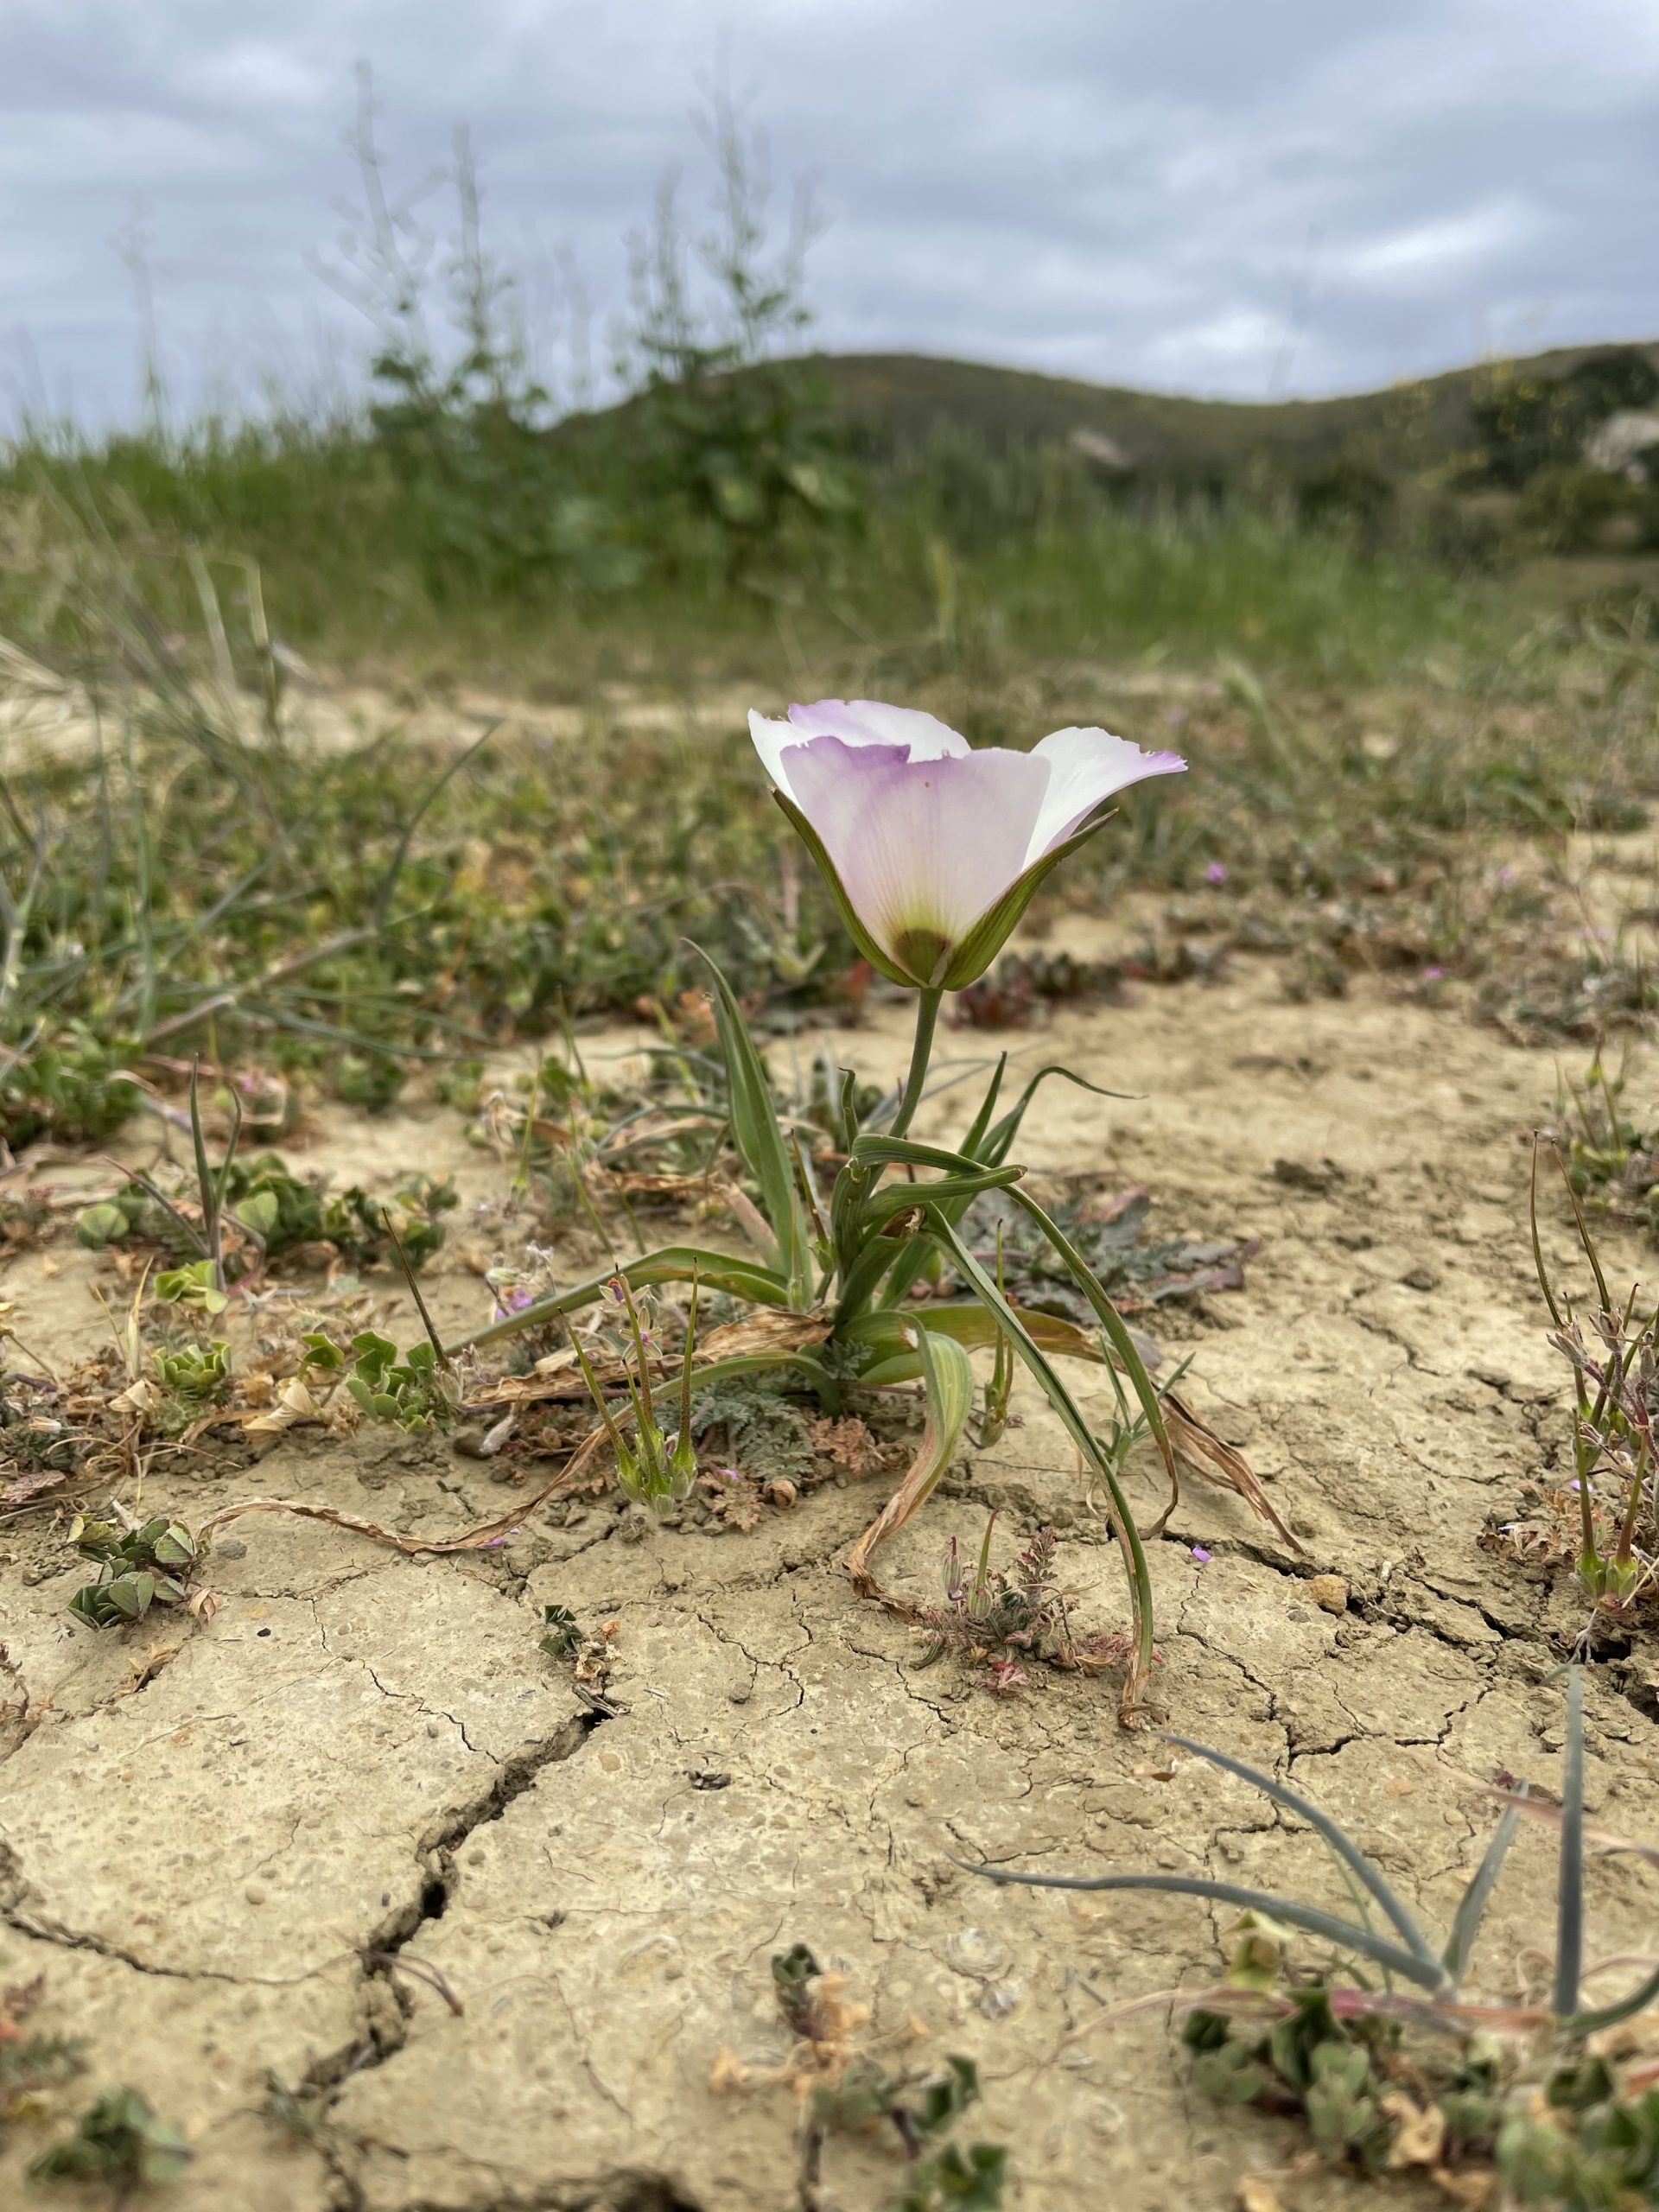 Image of Tough little rare lily growing out of cracked earth in Santa Barbara, California. Photo by Heather Schneider.